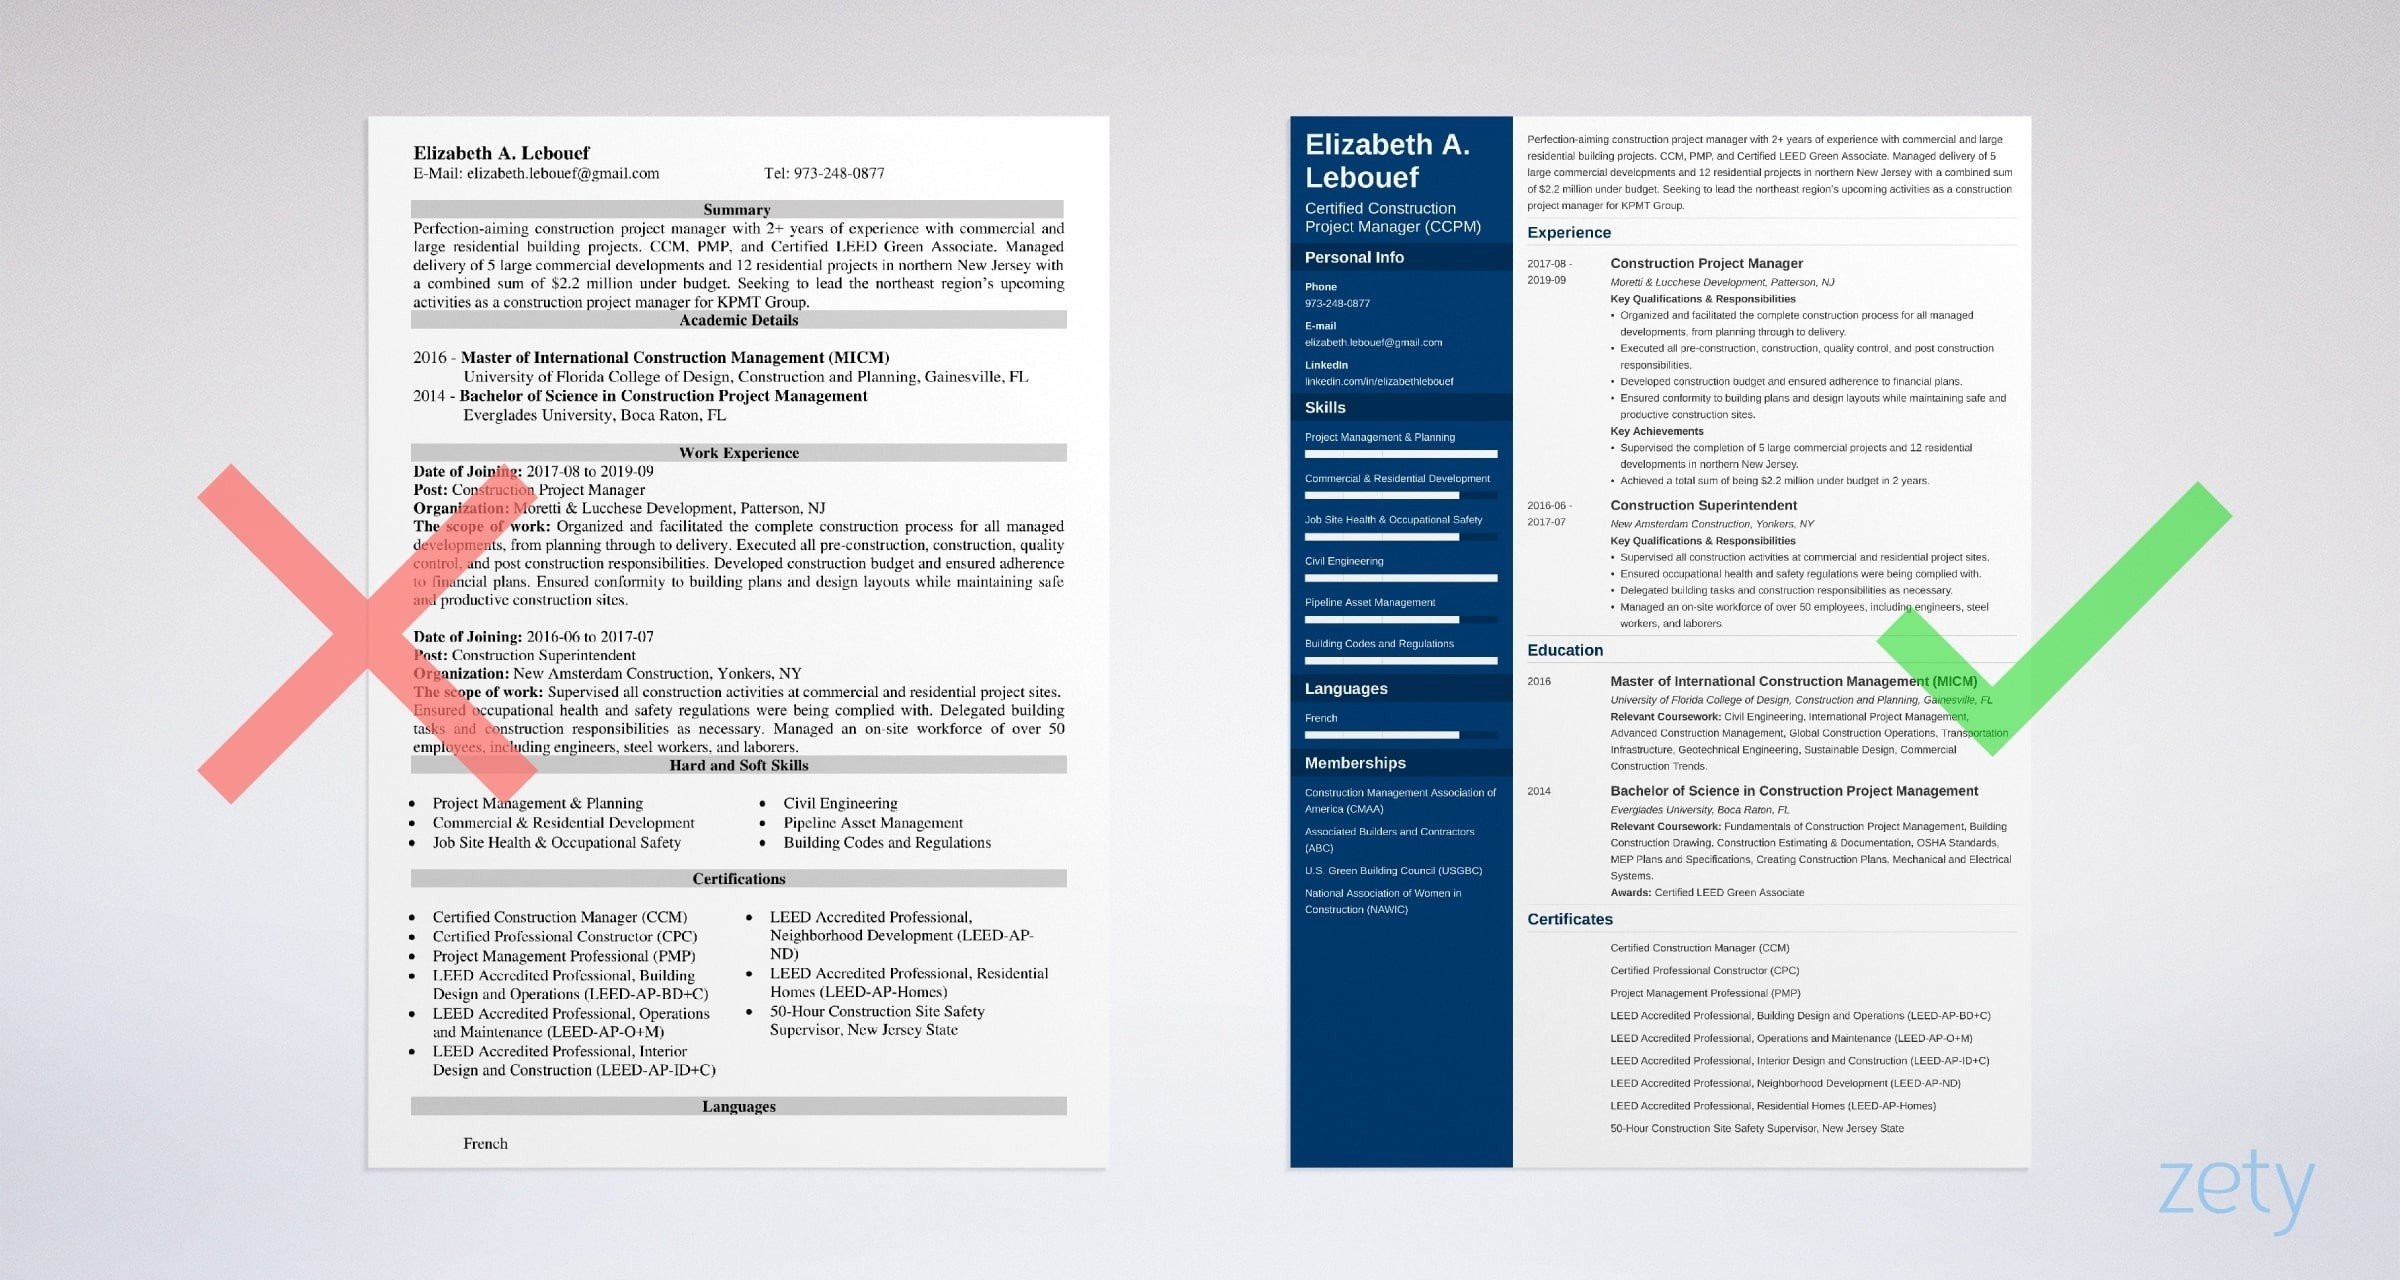 Sample Resume Experience In New Construction at University Construction Project Manager Resume Examples & Guide